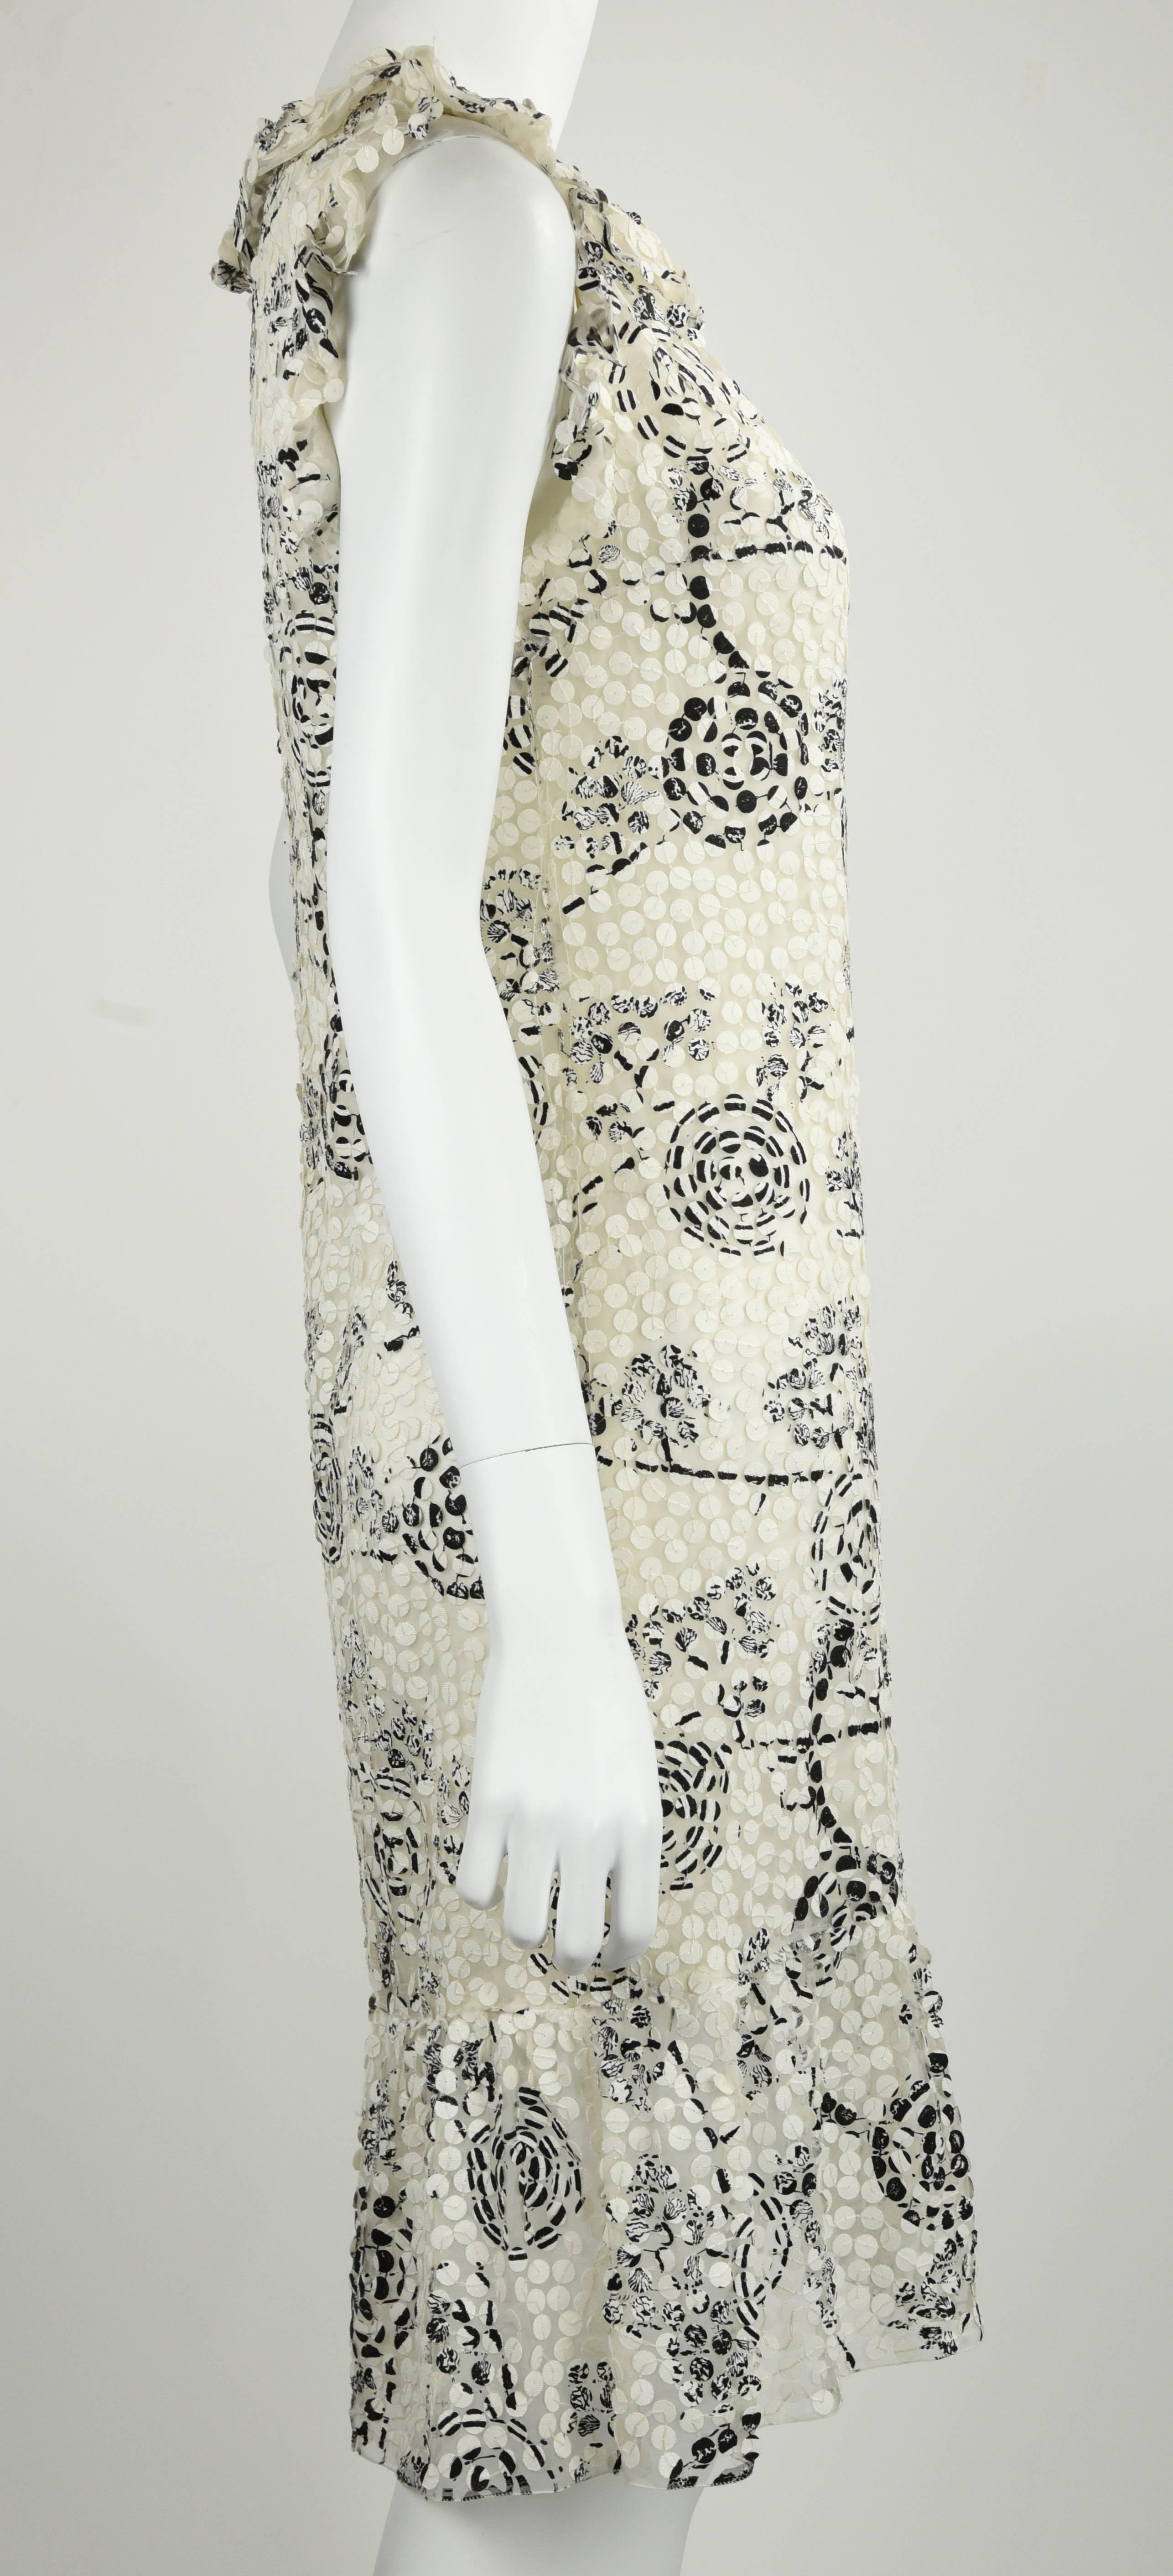 This is a lovely and unusual Chanel Dress with great versatility. Textiles are 40% vinyl, 30% linen and 30% silk.